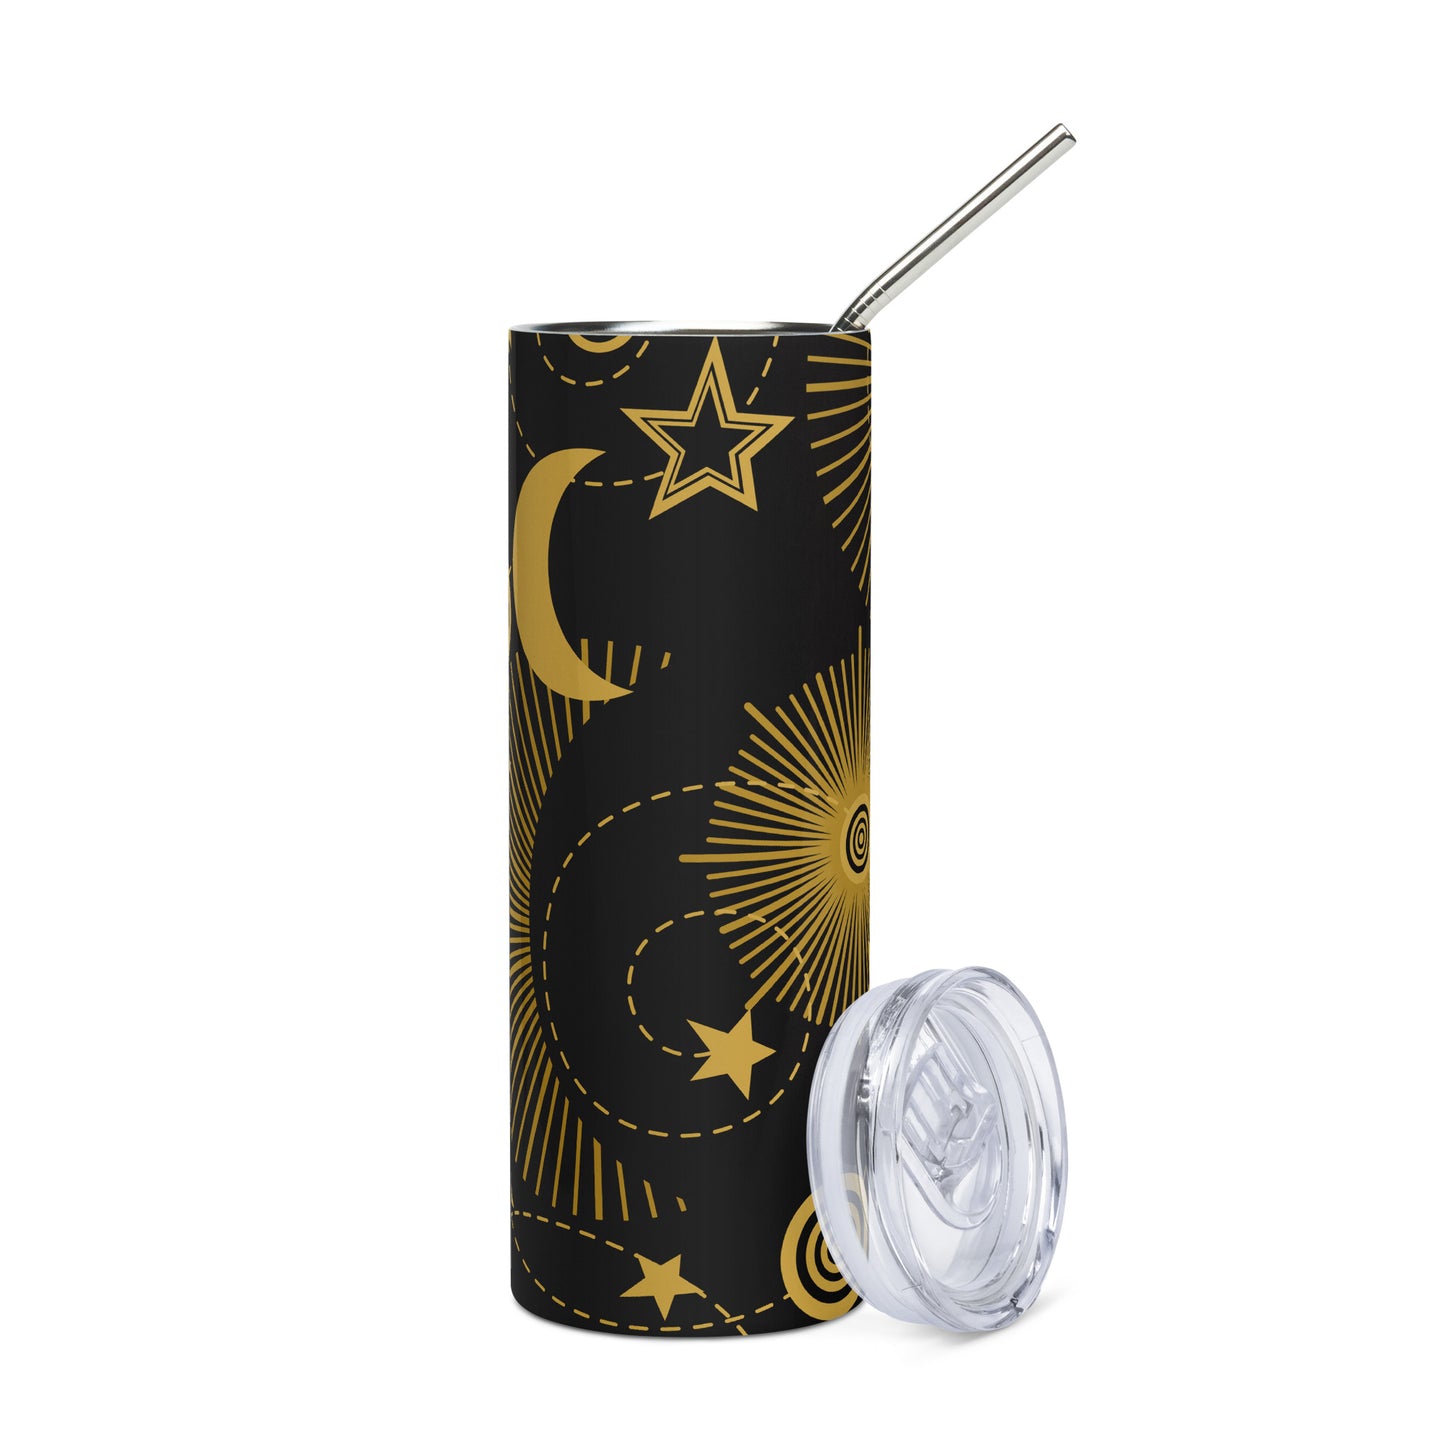 Universe stainless steel tumbler